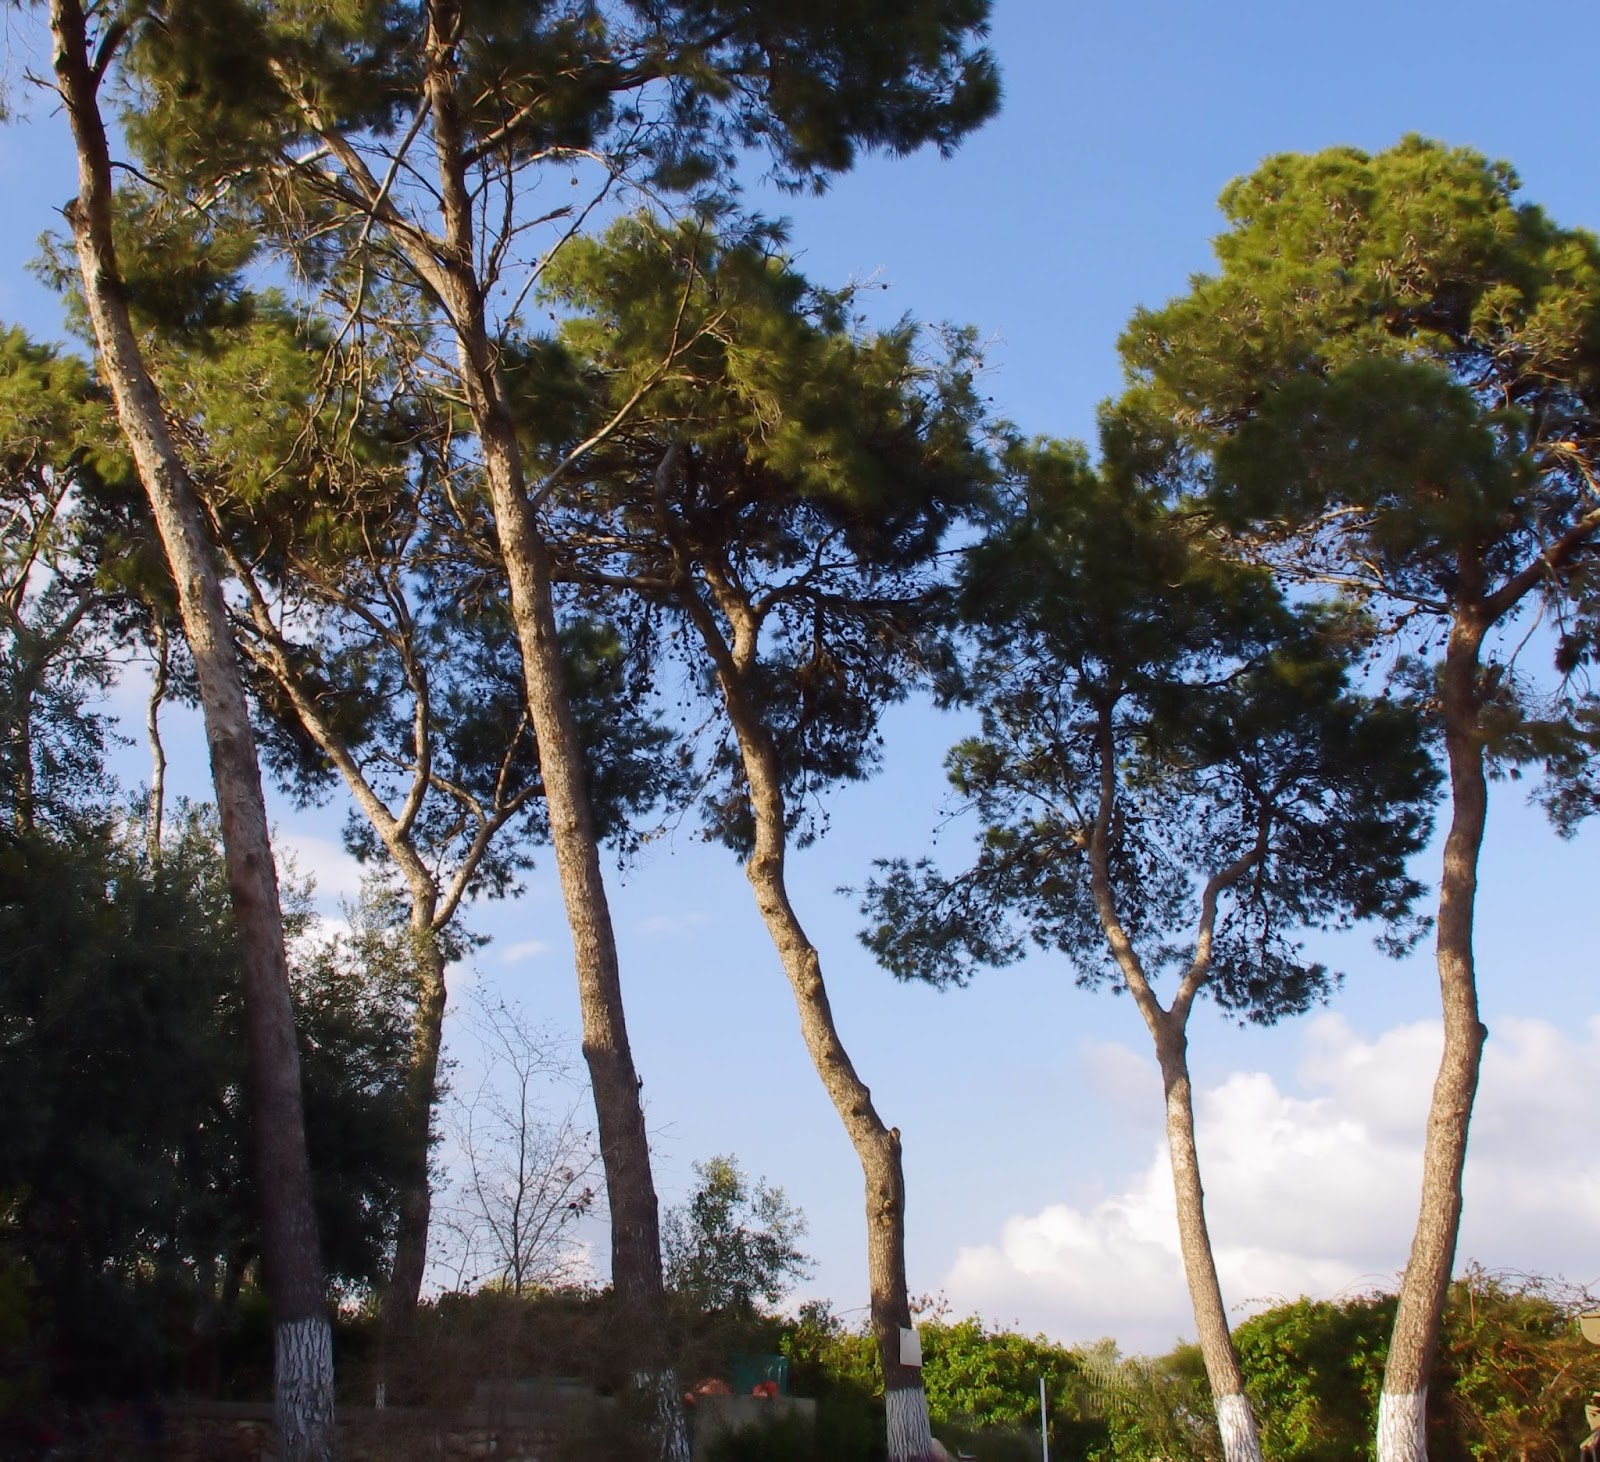 A letter from Israel: The Jerusalem Pine of Israel - a hate/love story